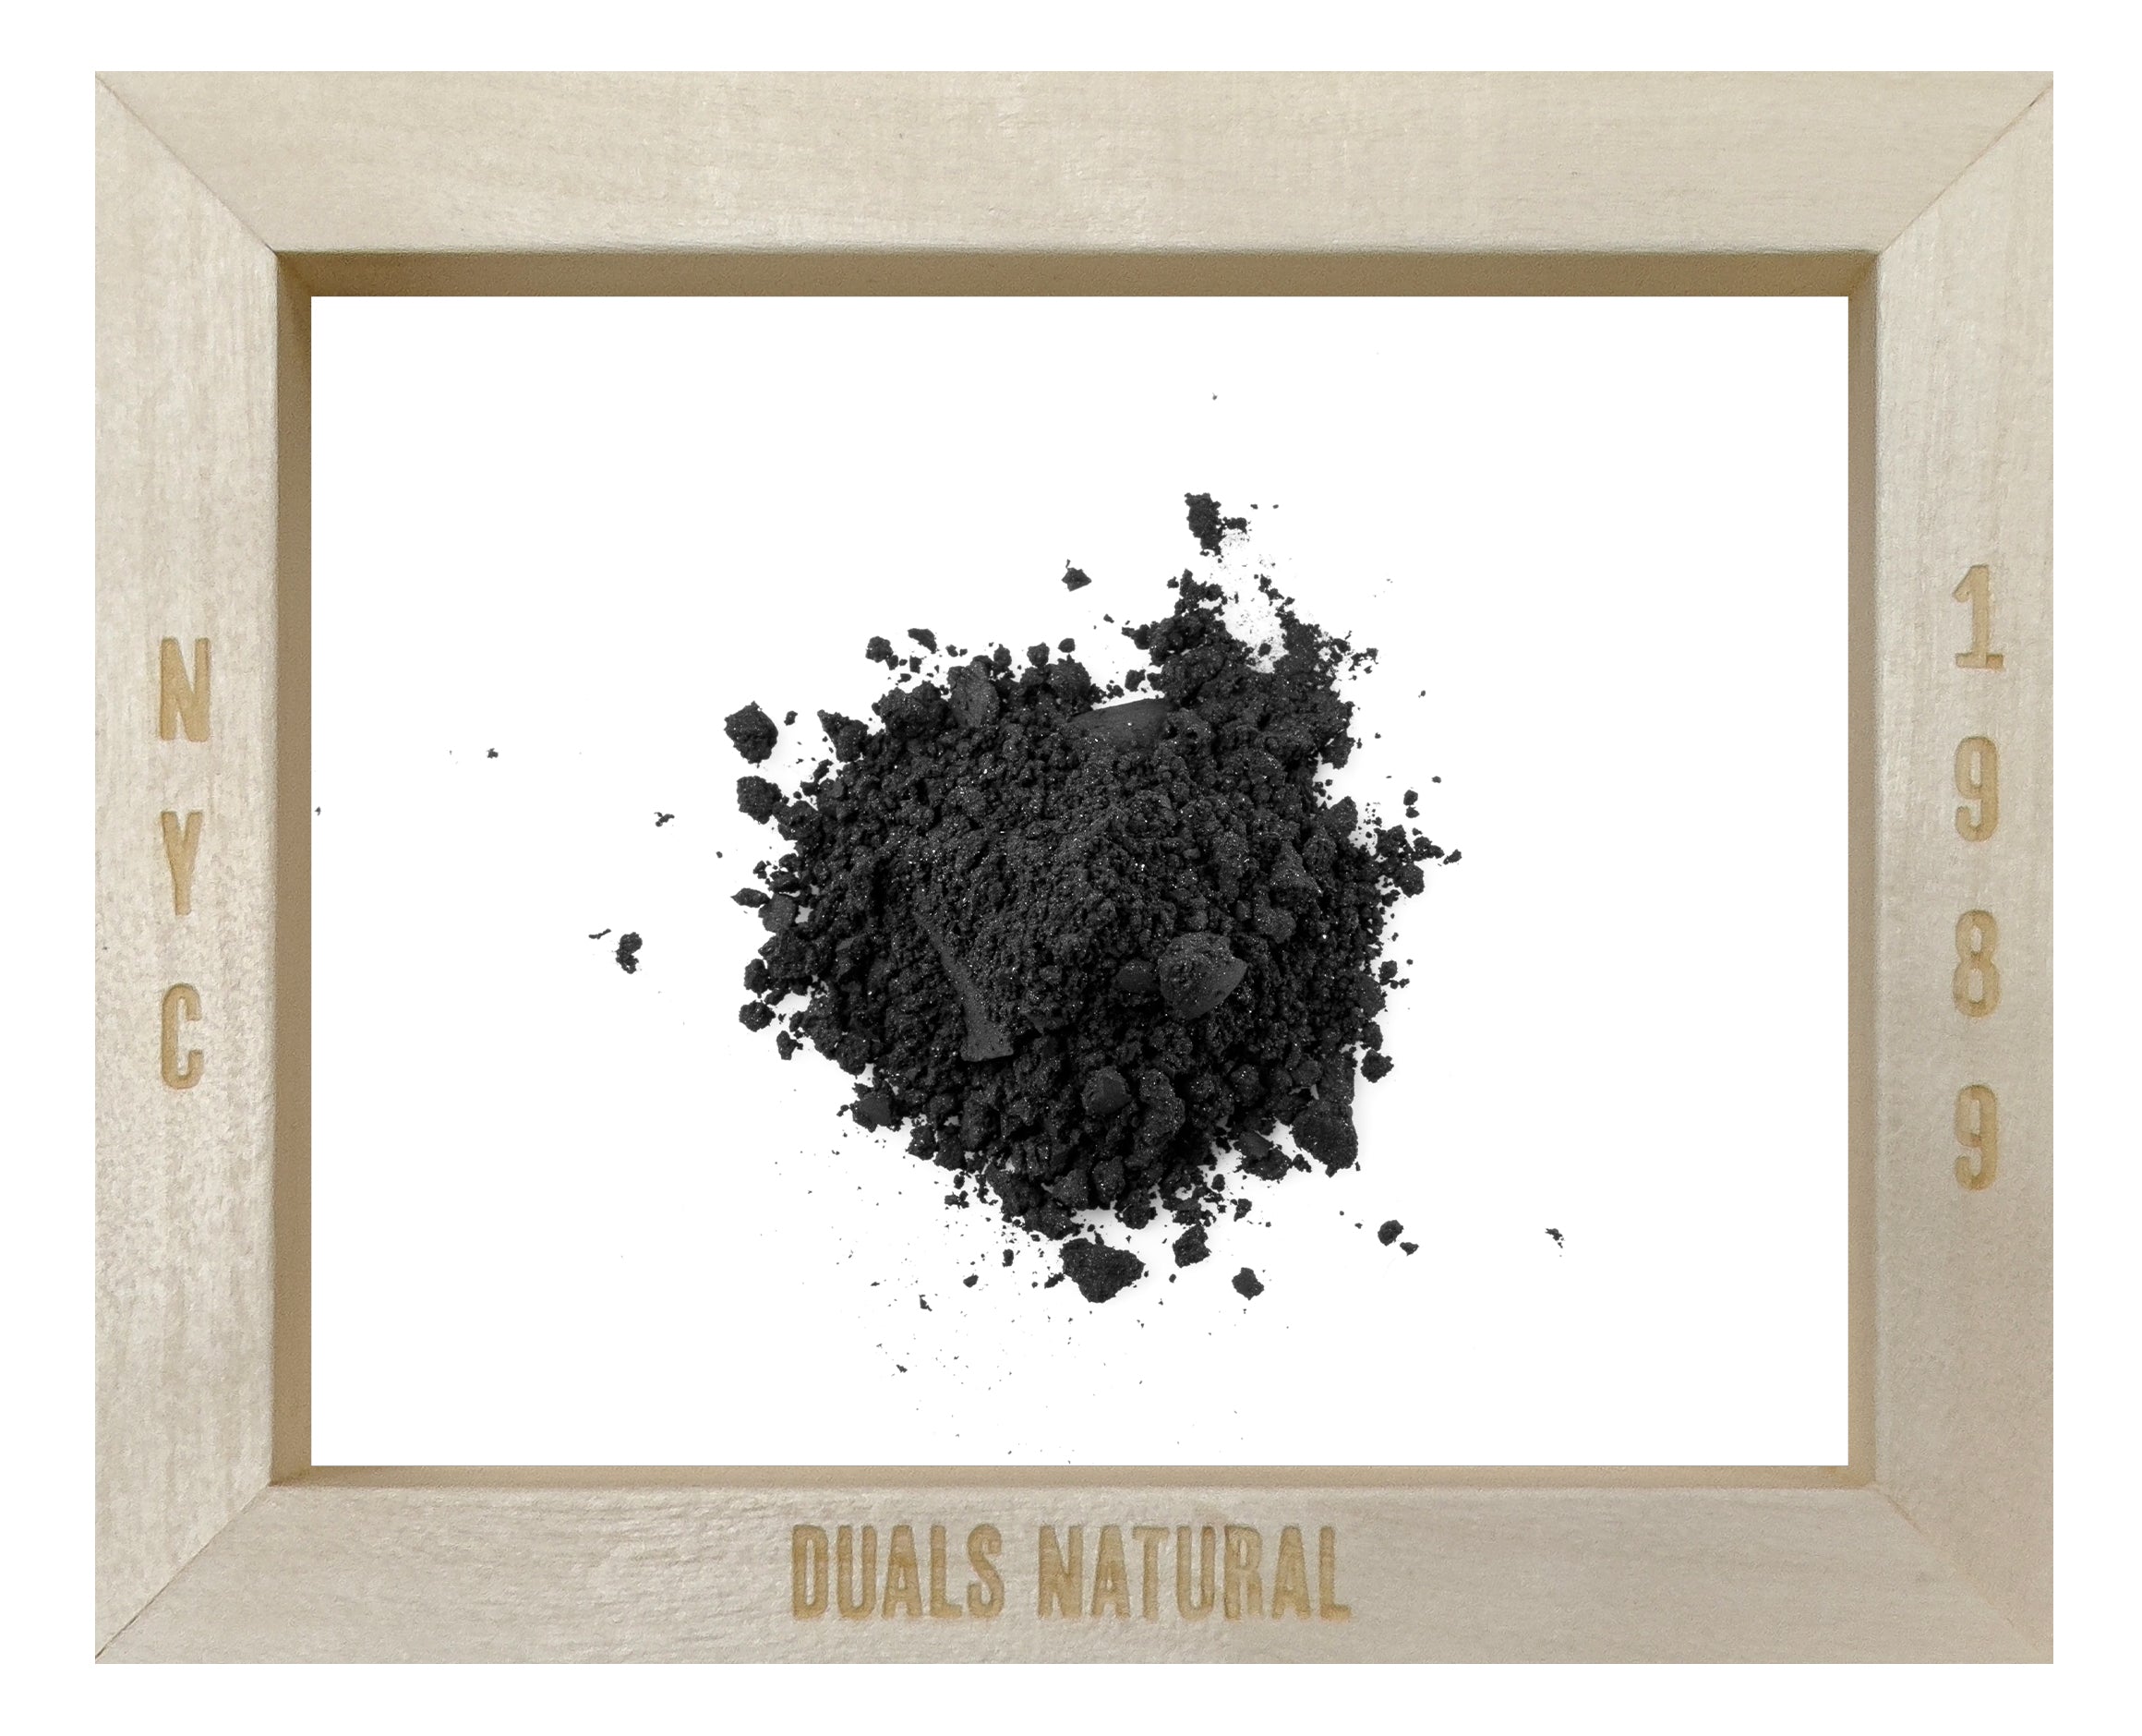 ACTIVATED CHARCOAL